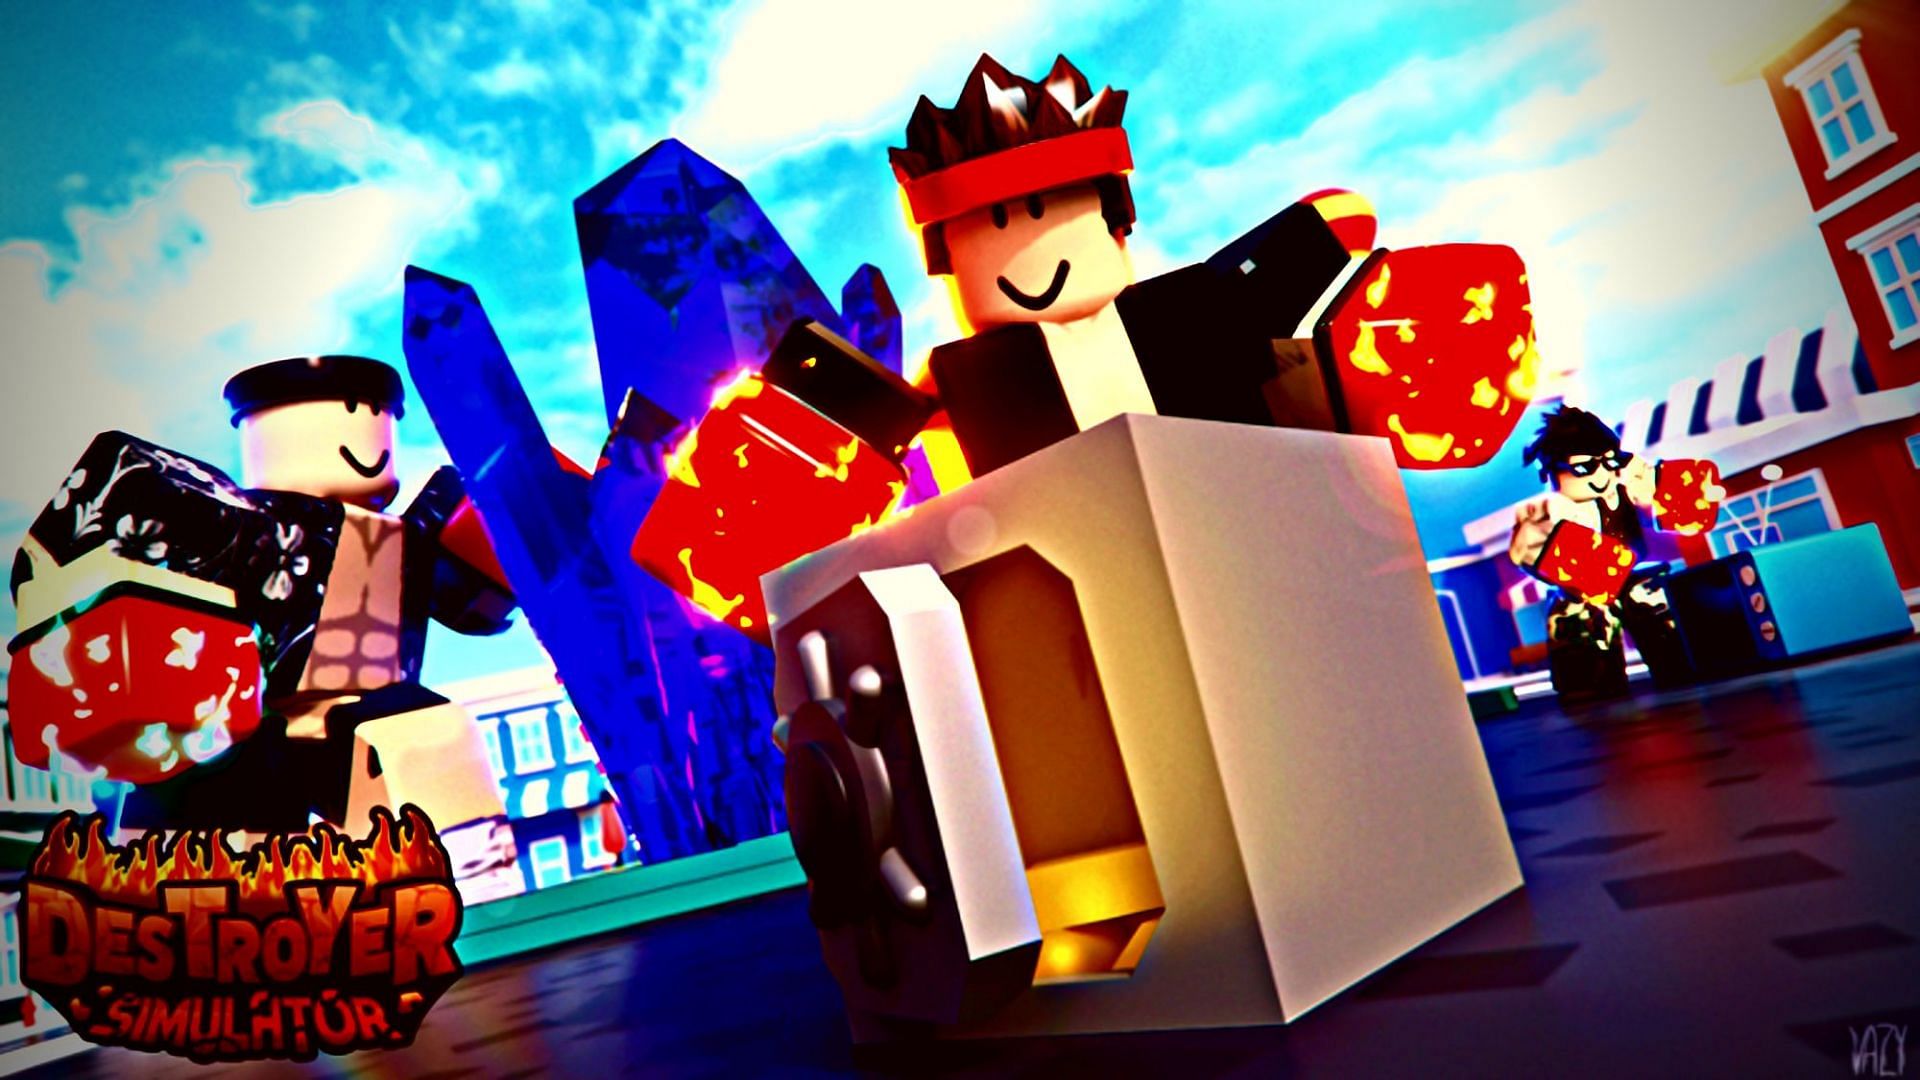 Let your inner rage loose in this Roblox title (Image via Roblox)